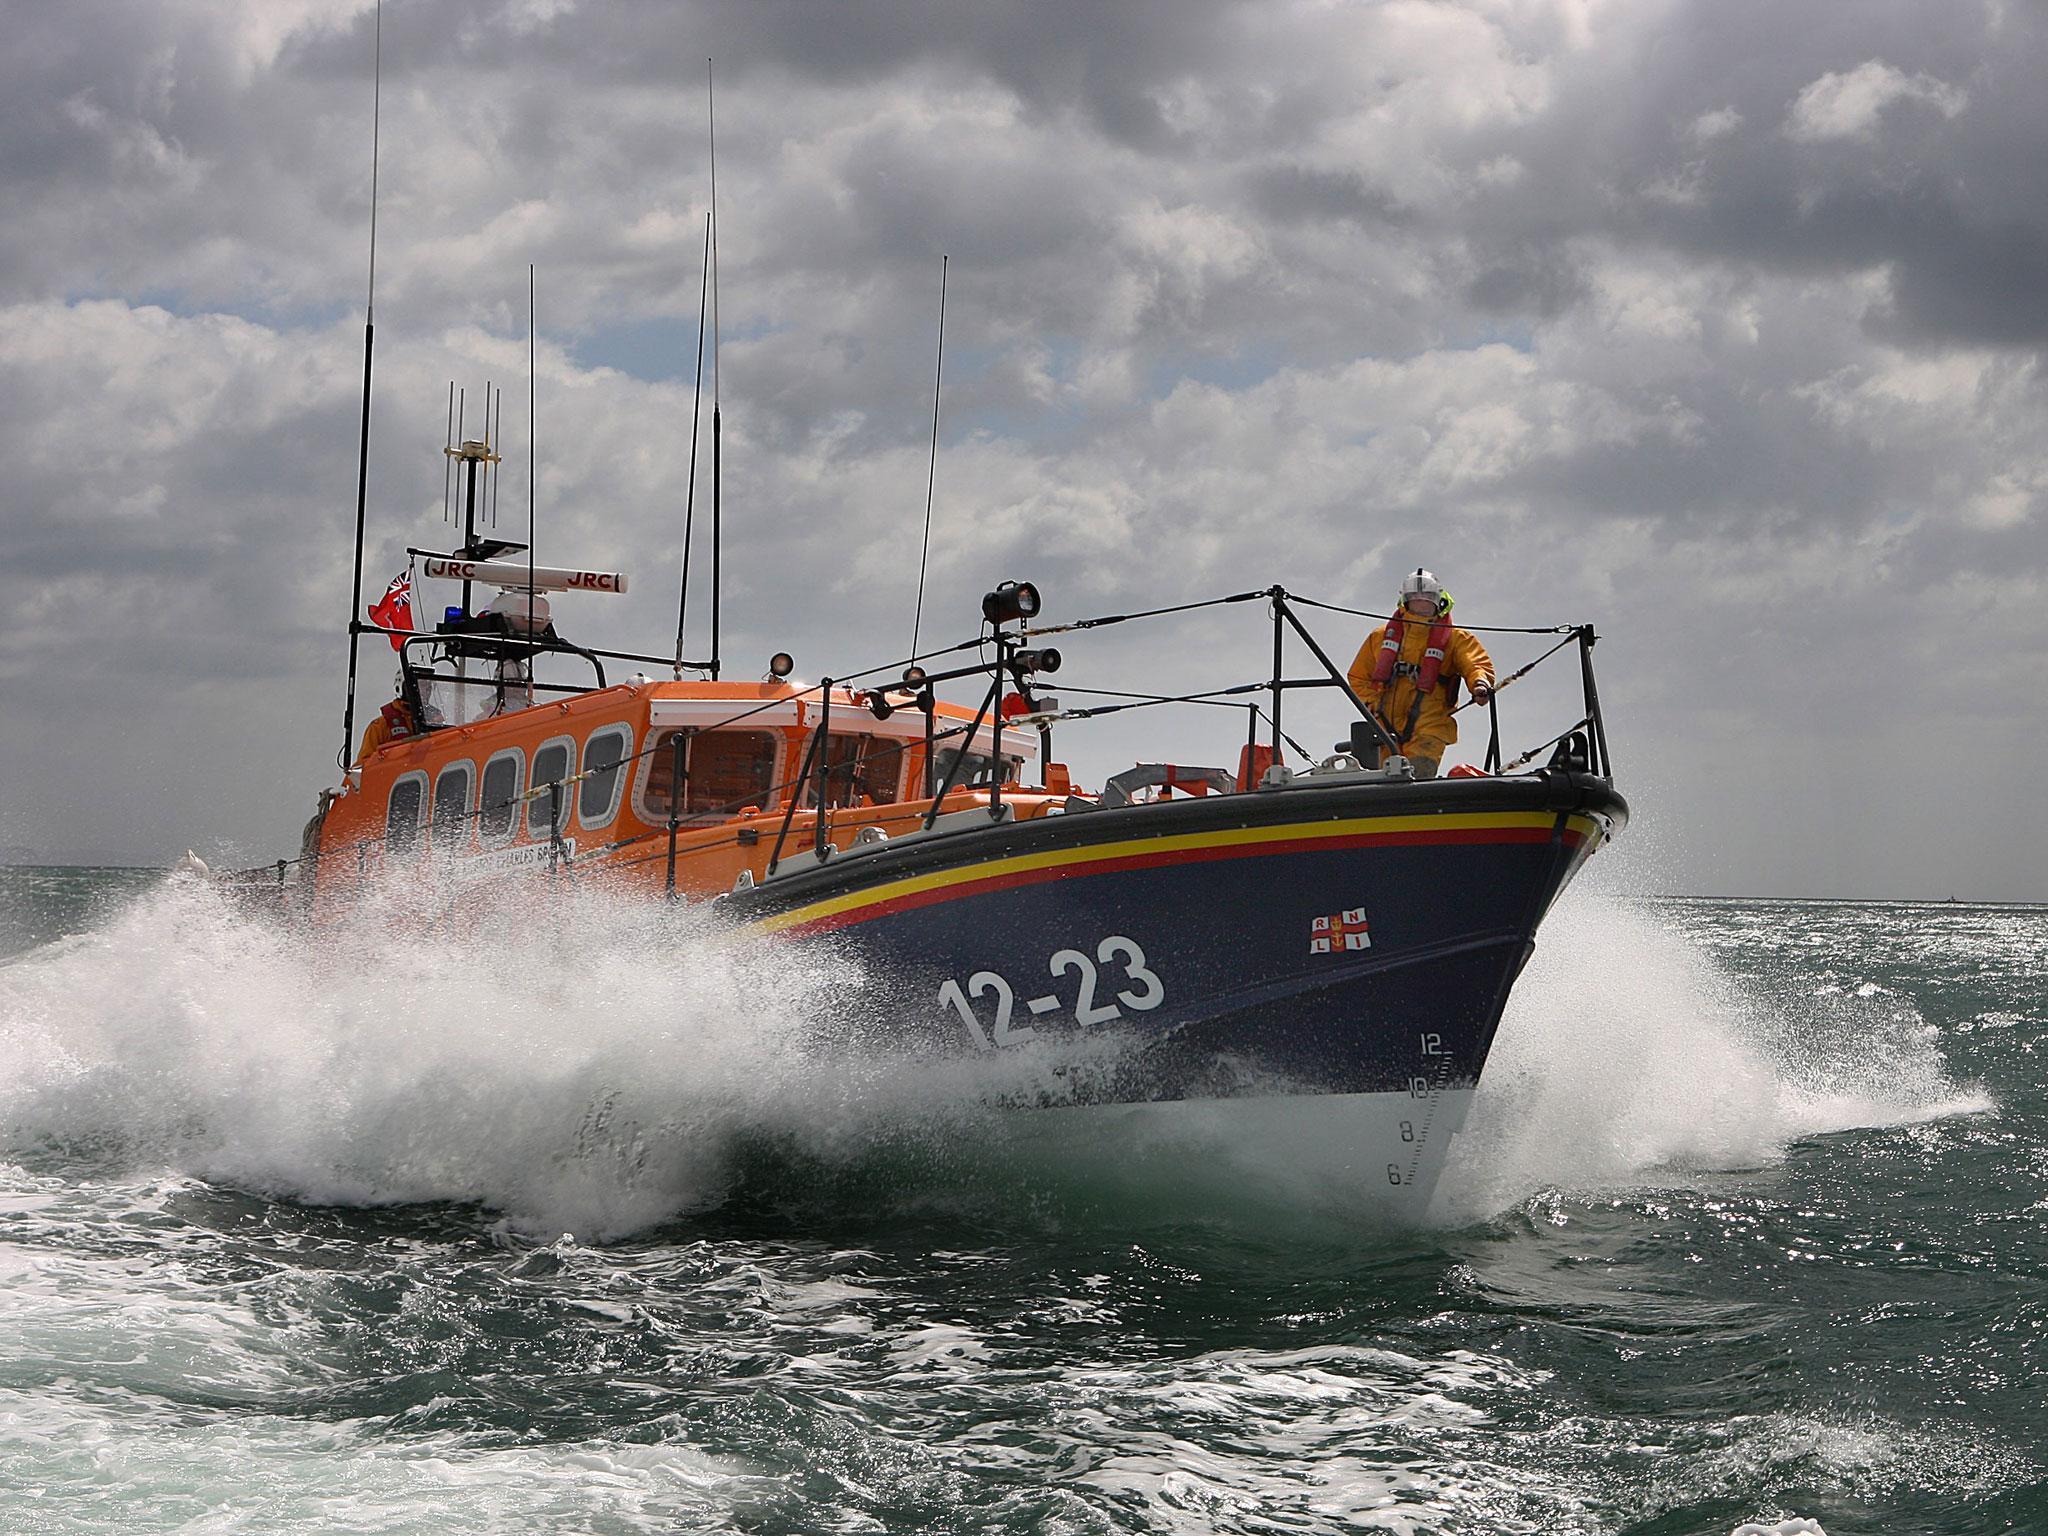 Leave a legacy to some of the UK's leading charities, such as the Royal National Lifeboat Institution